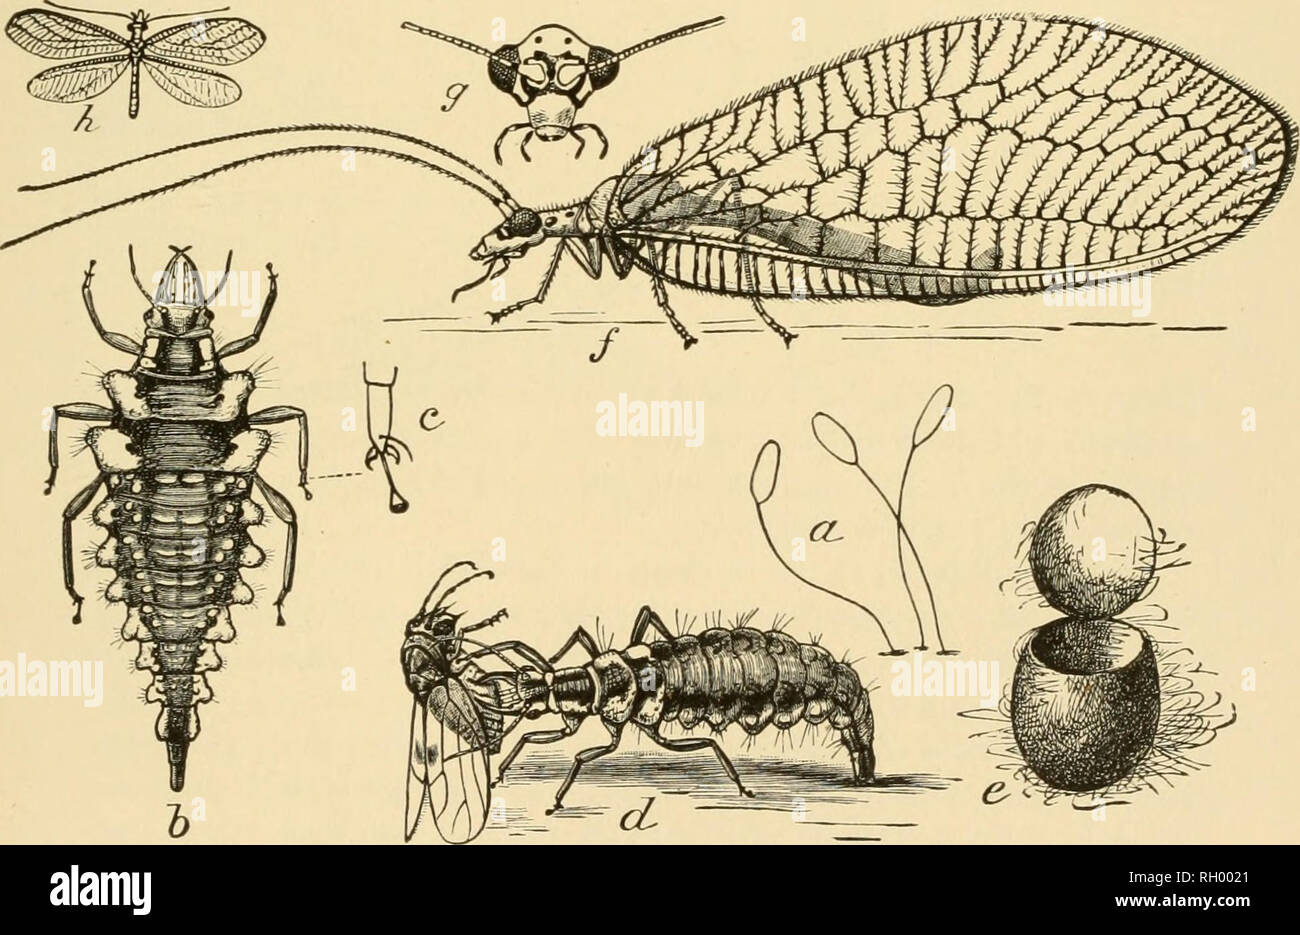 . Bulletin. Geography. 300 Fig. 299.—A parasitic wasp depositing eggs in the body of a grain louse (after Washburn, Bull. 108, Fig. 16, p. 274). Fig. 300.—^A louse killed by a parasite (after Washburn, loc. cit., Fig. 12, p. 276).. Fig. 301.—The life history of the golden-eyed lacewing {Chrysopa oculala): a, eggs; J, the larva—&quot;aphis-lion&quot;; c, foot of the larva; c/, the larva seizing an aphid; e, the pupal cocoon; /, g, h, the adult; k, natural size (after Chittenden, Div Ent U.S. Dept. Agr.).. Please note that these images are extracted from scanned page images that may have been di Stock Photo